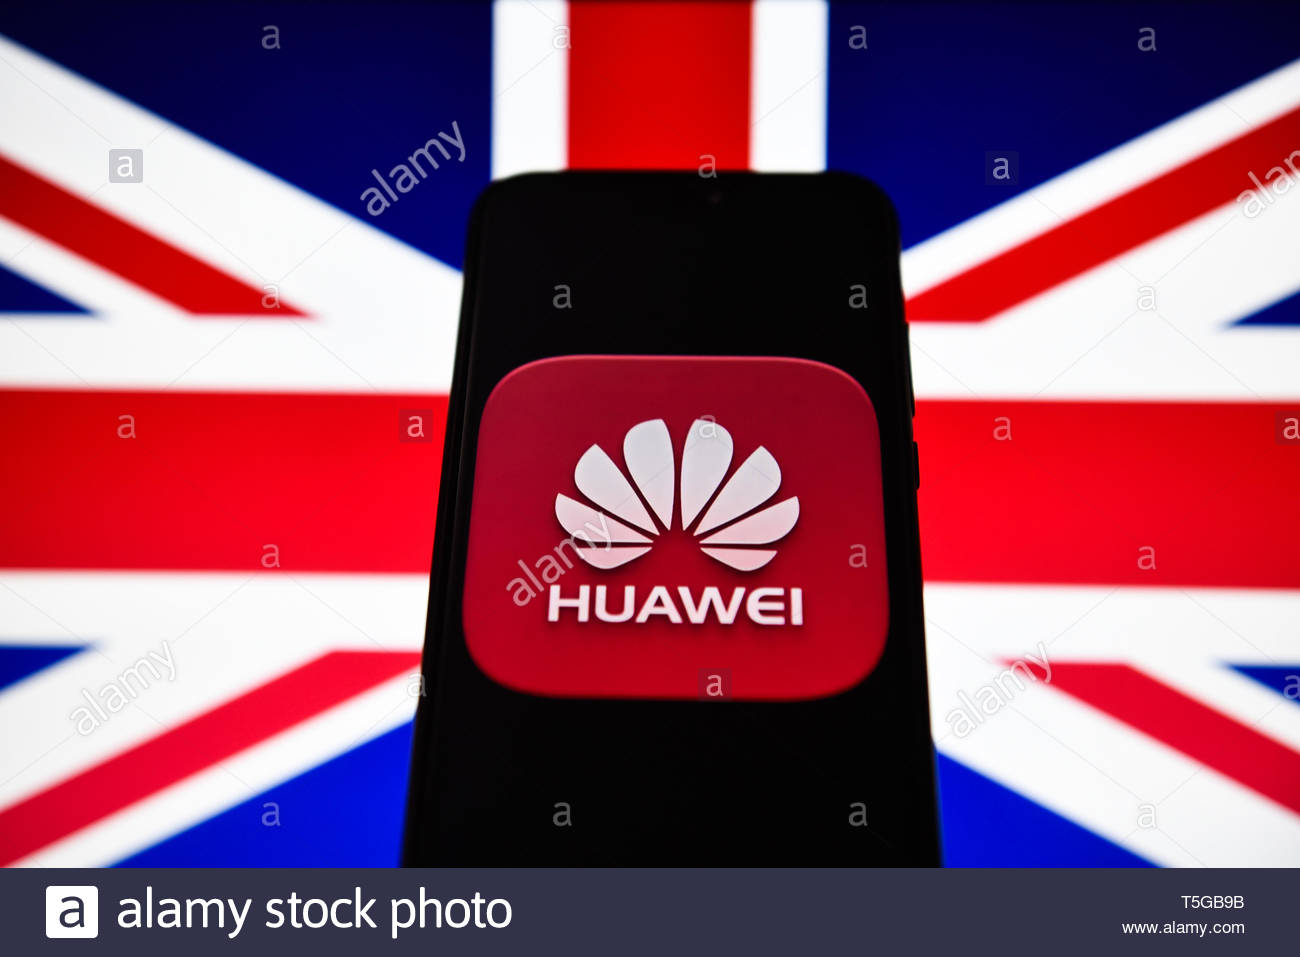 Portugal 24th Apr In This Photo Illustration A Huawei Logo